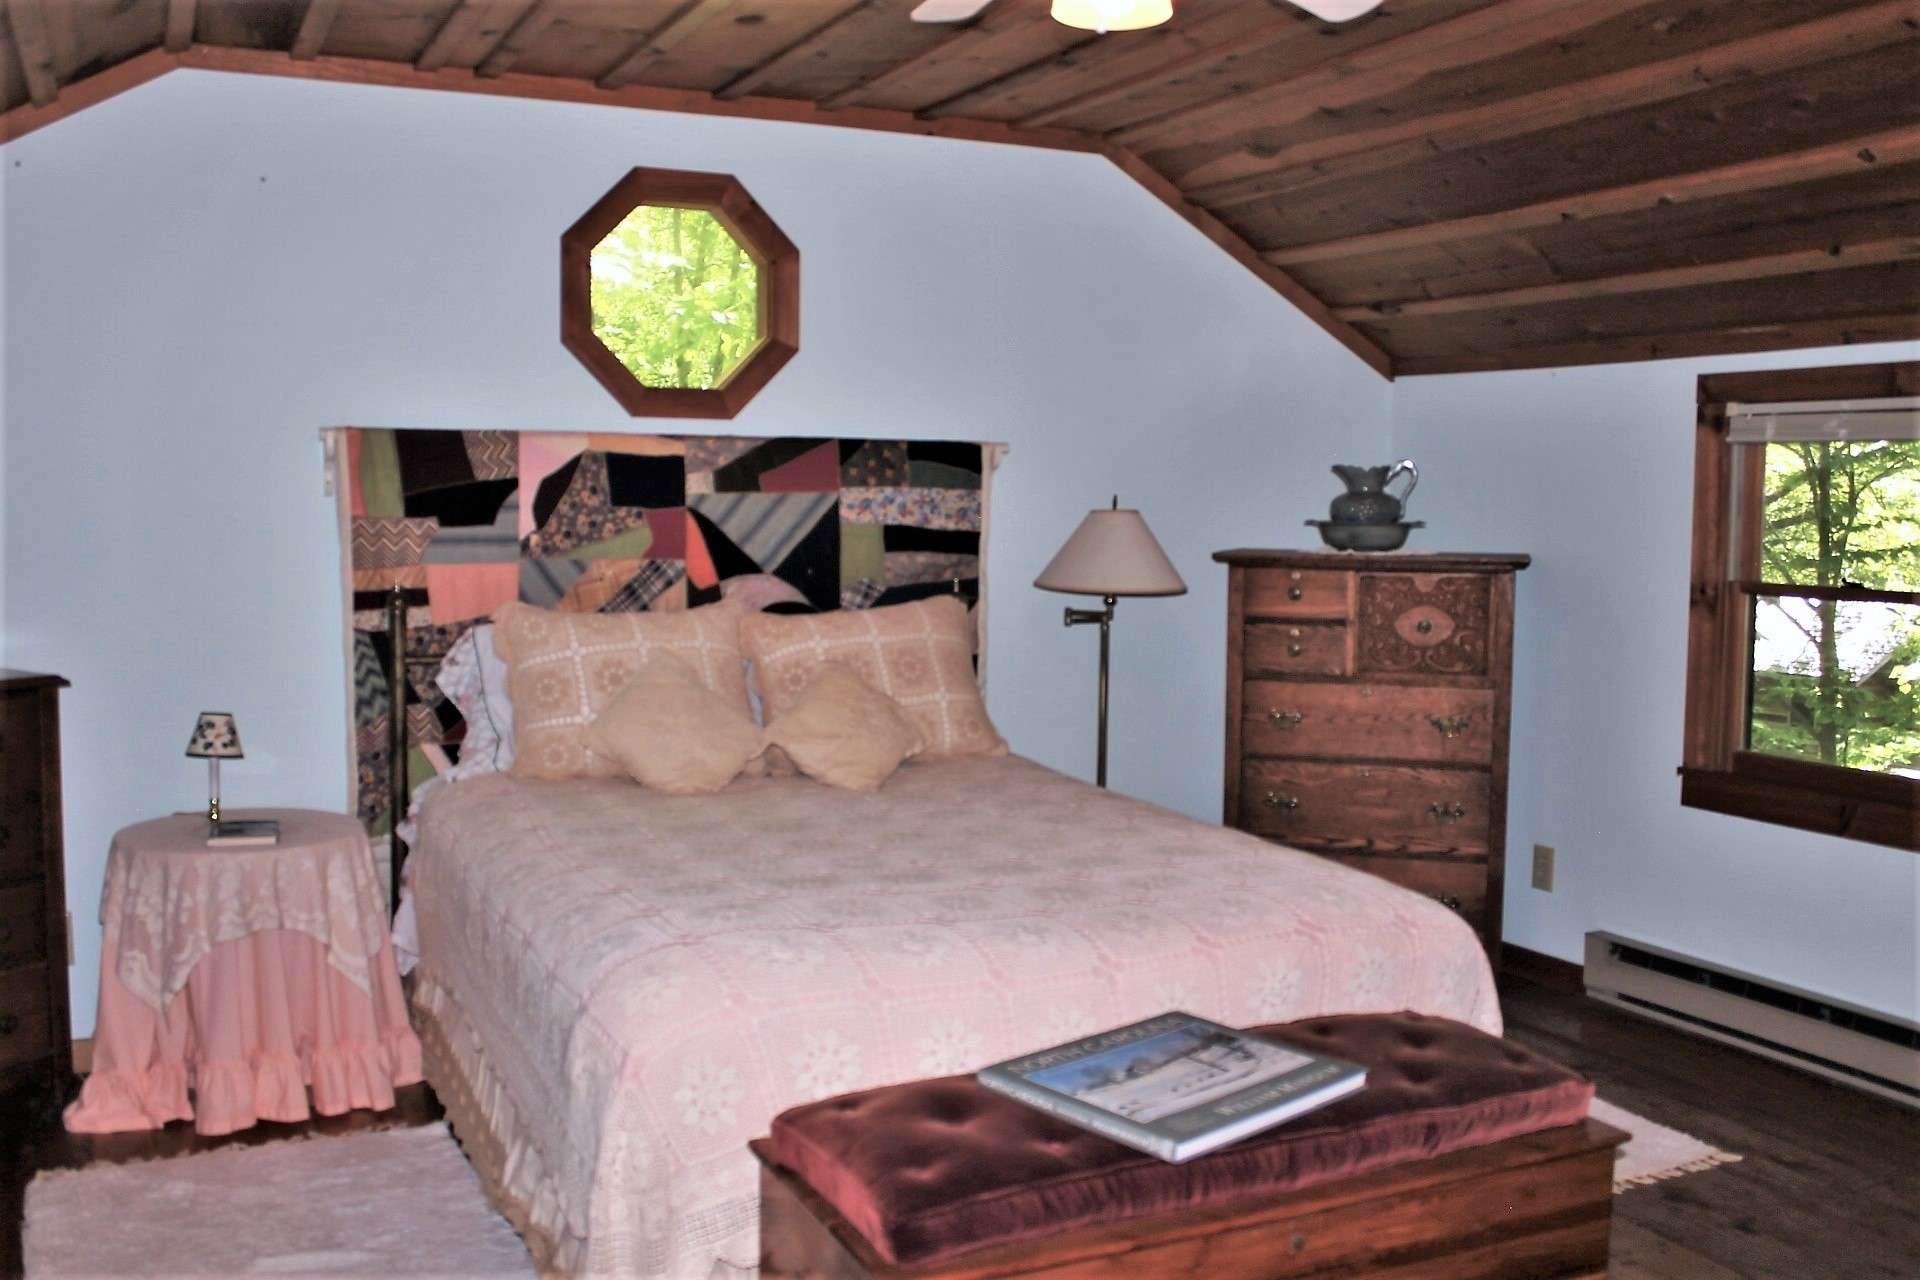 Overnight guests will enjoy sleeping in this charming bedroom while falling asleep to the soothing sound of the creek